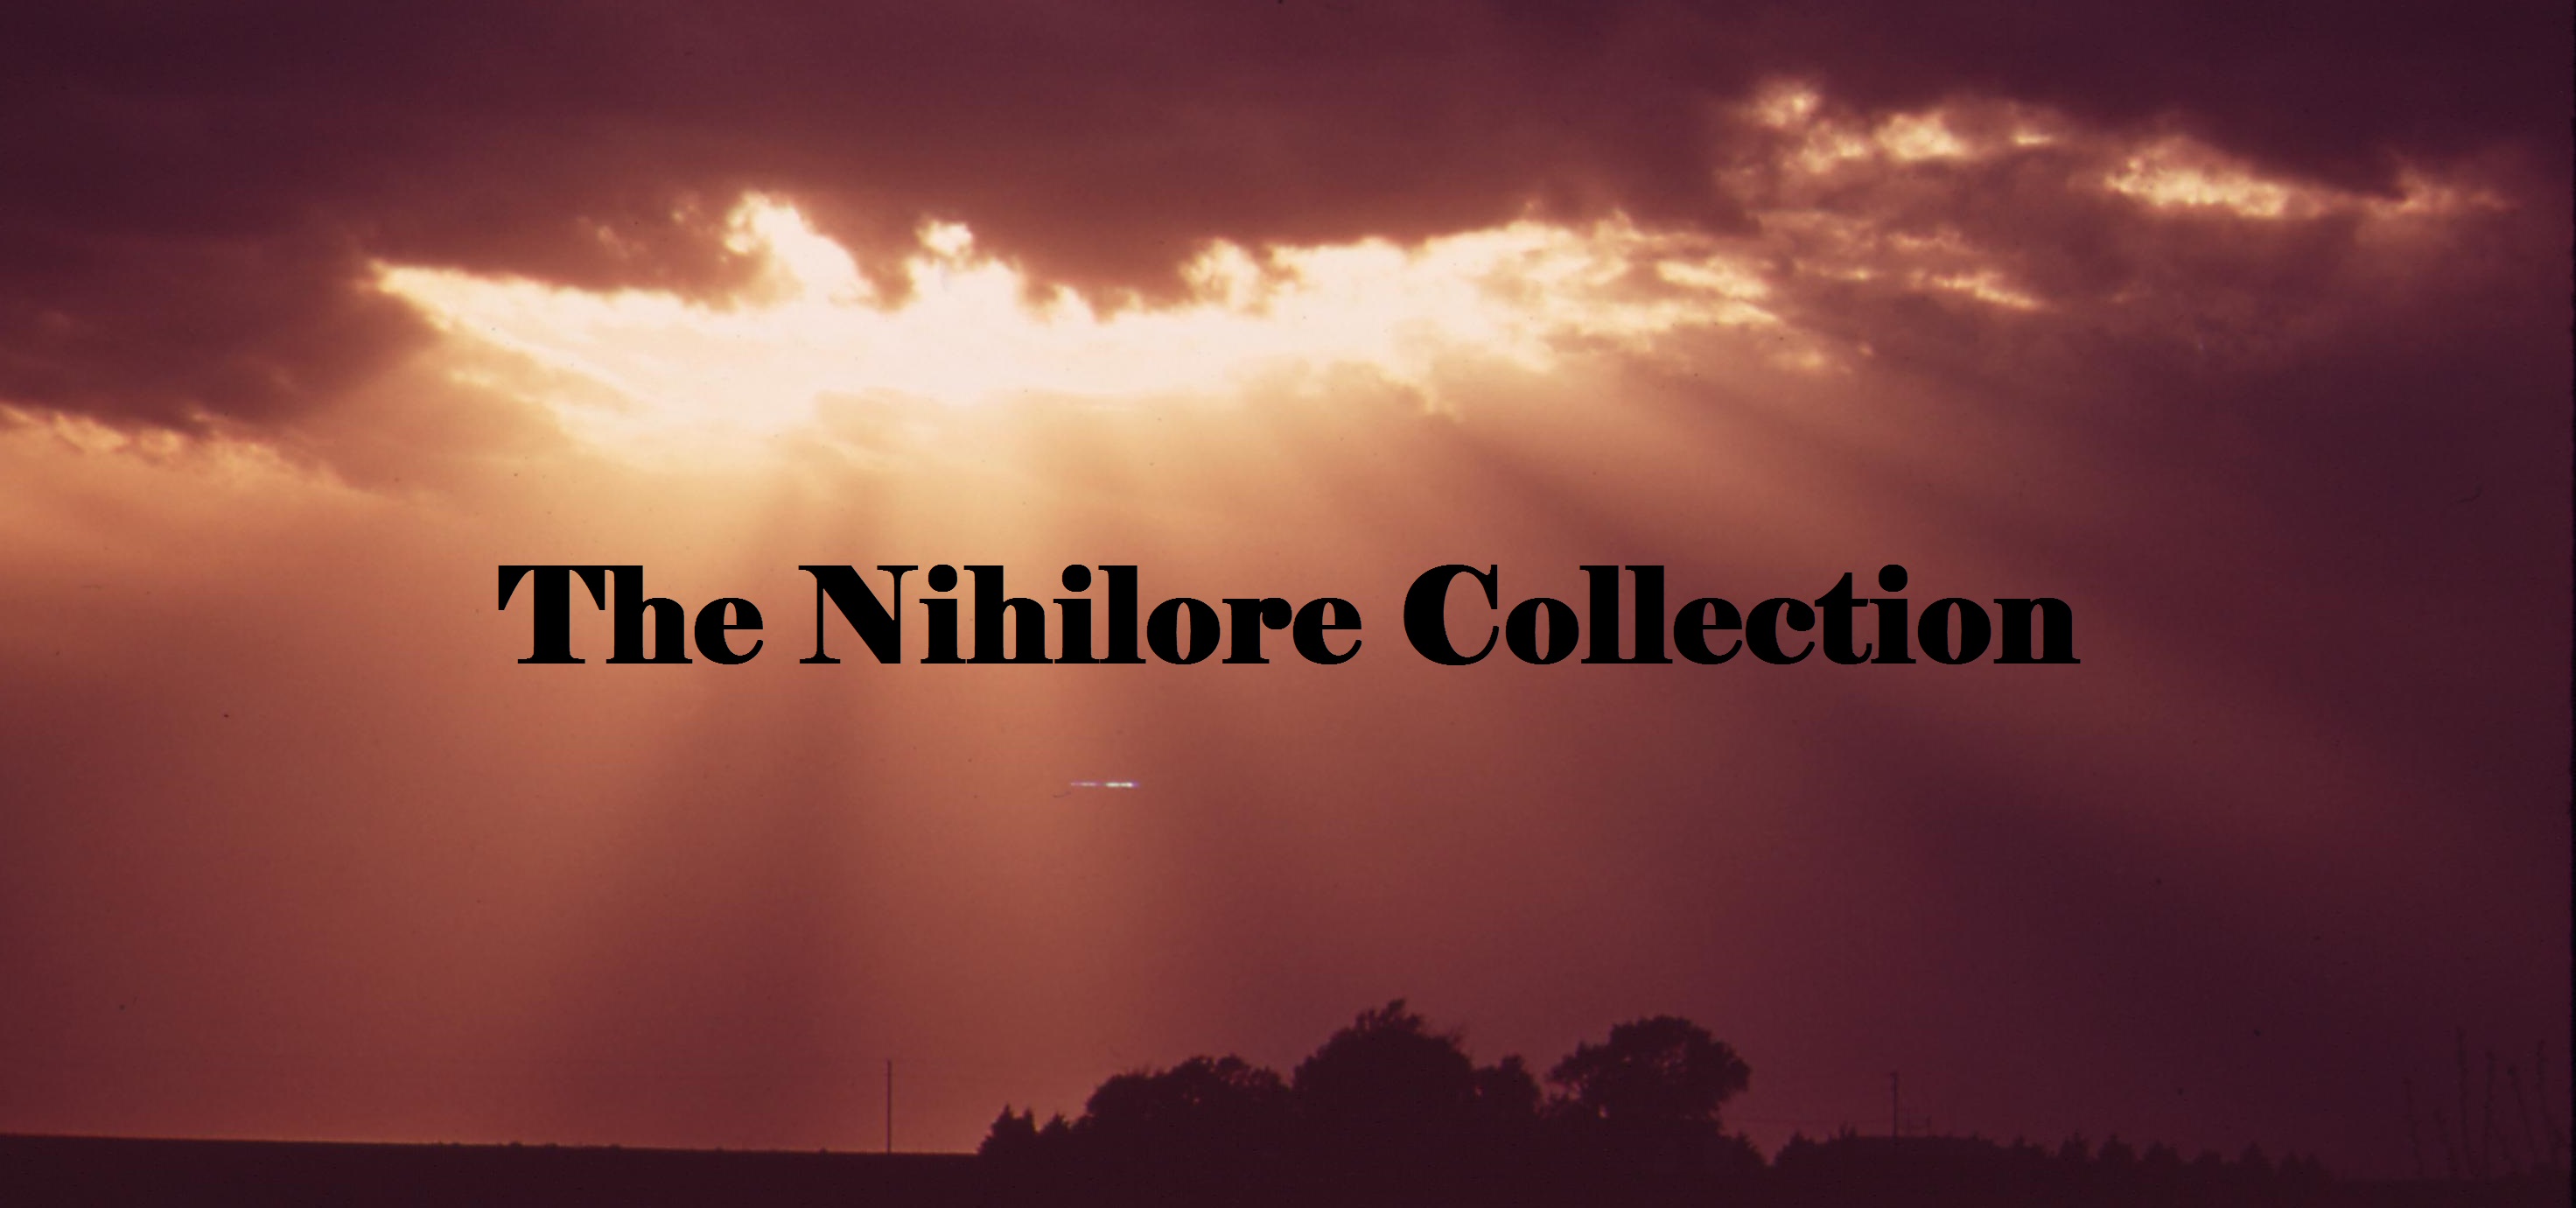 The Nihilore Collection (Creative Commons music)